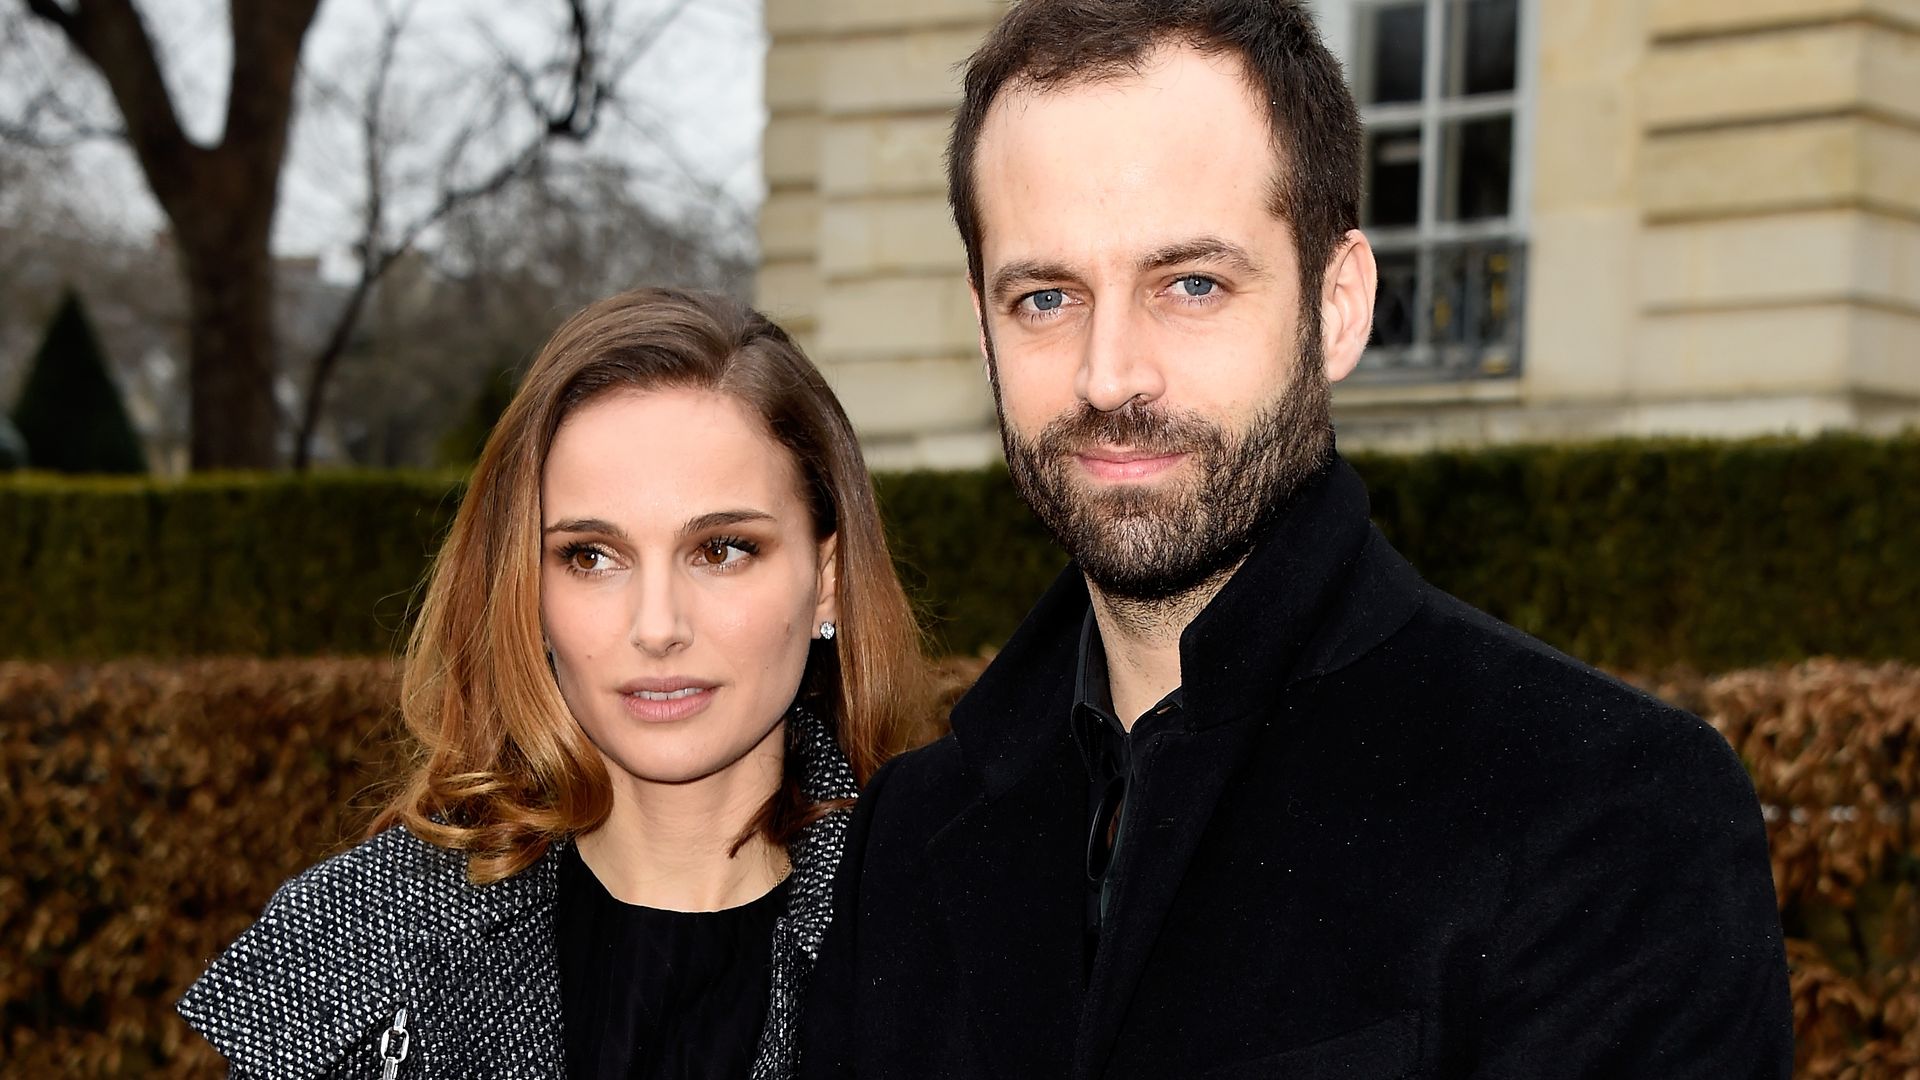 Natalie Portman paid romantic tribute to Benjamin Millepied on 10th wedding anniversary before shocking affair reports